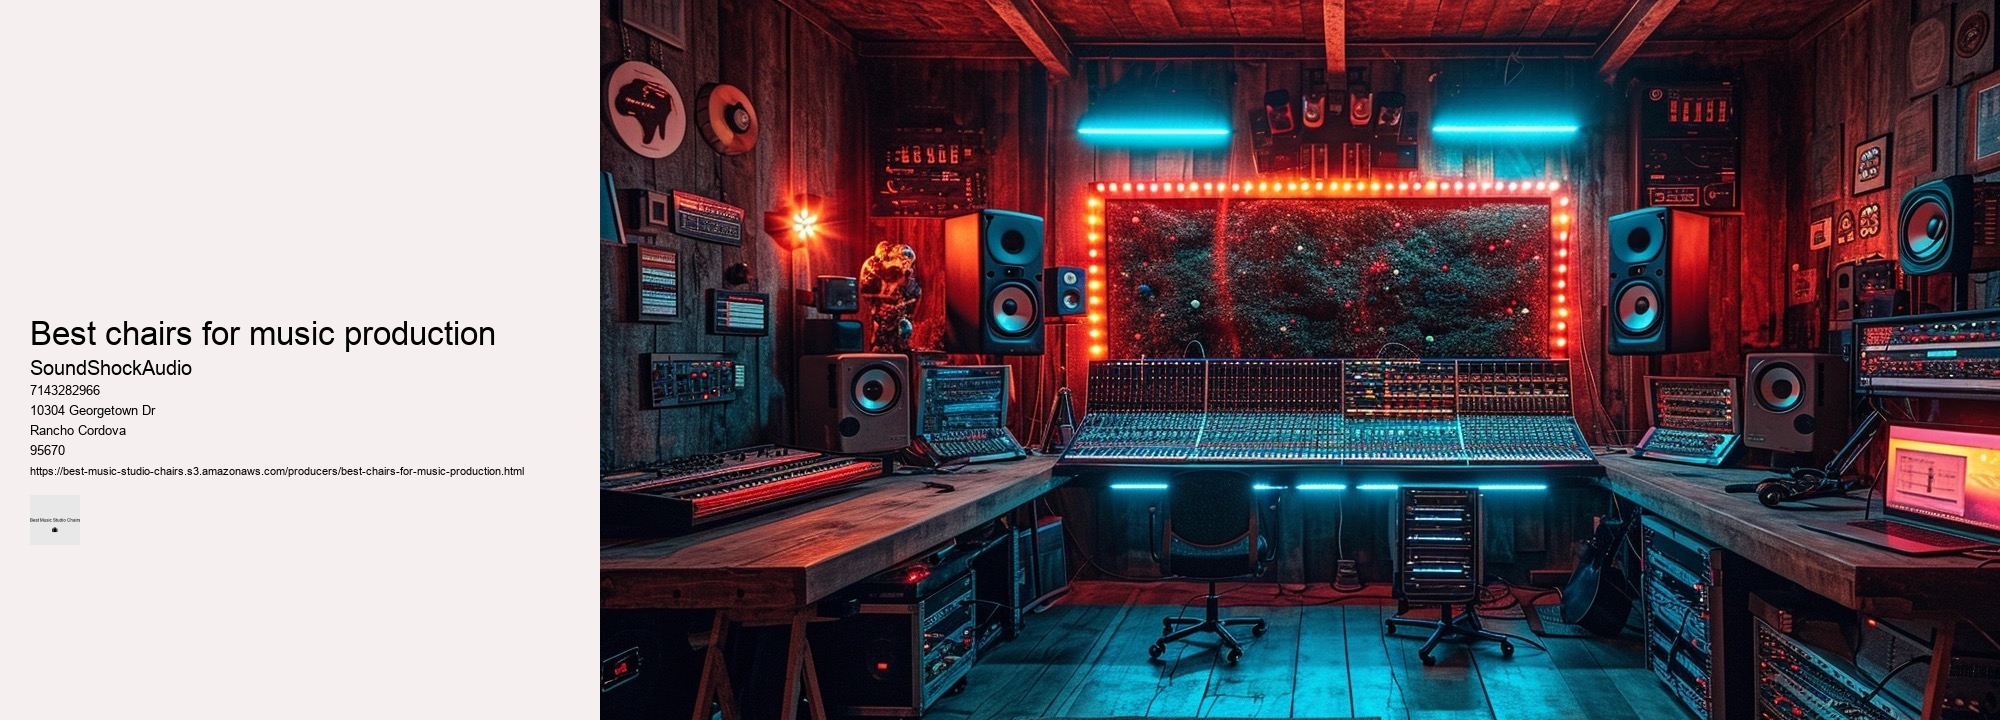 best chairs for music production